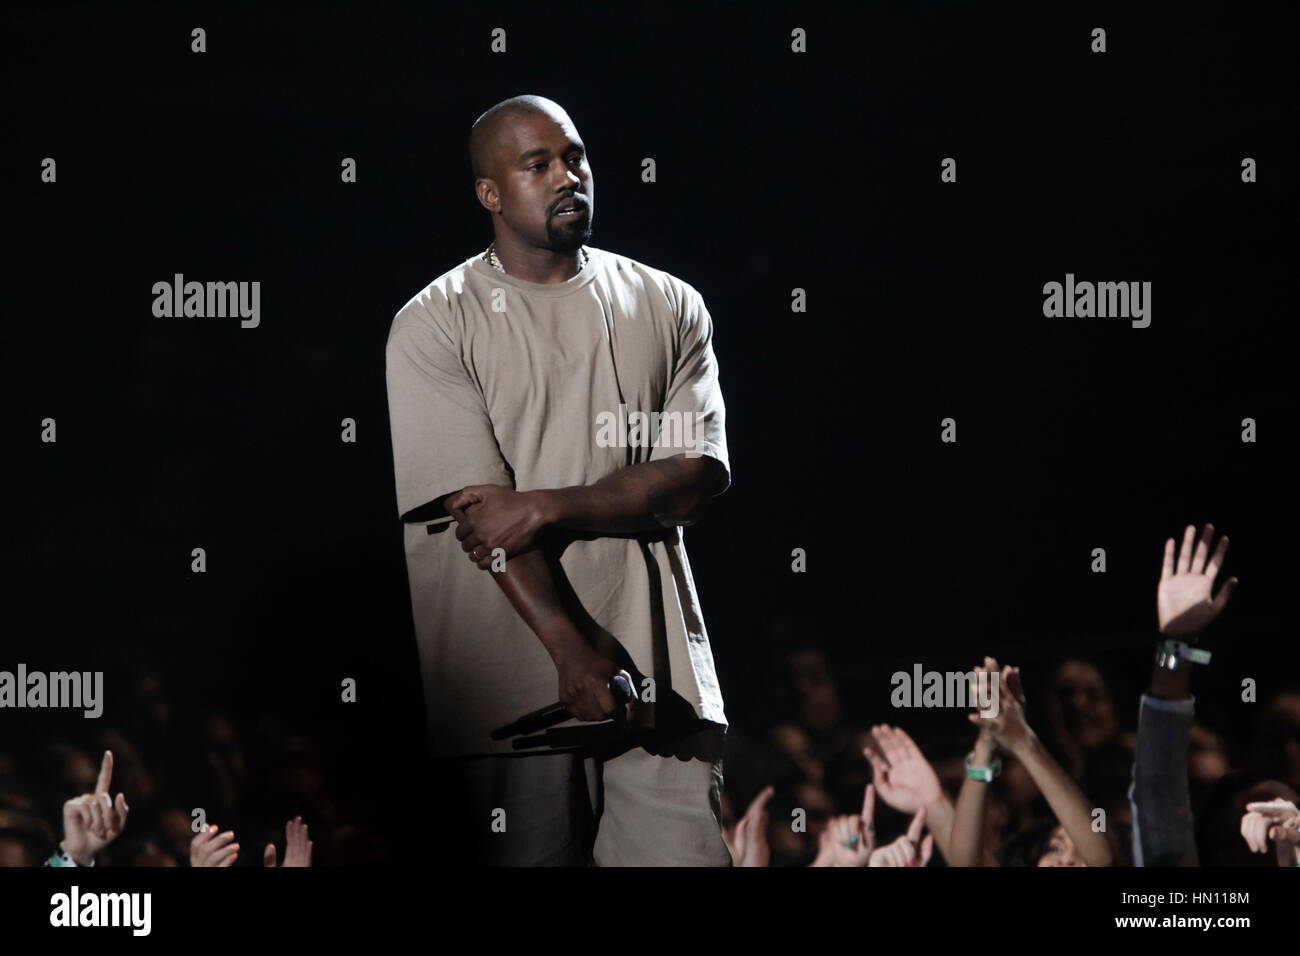 Rapper Kanye West at the MTV Video Music Awards on August 30, 2015 in Los Angeles. Photo by Francis Specker Stock Photo